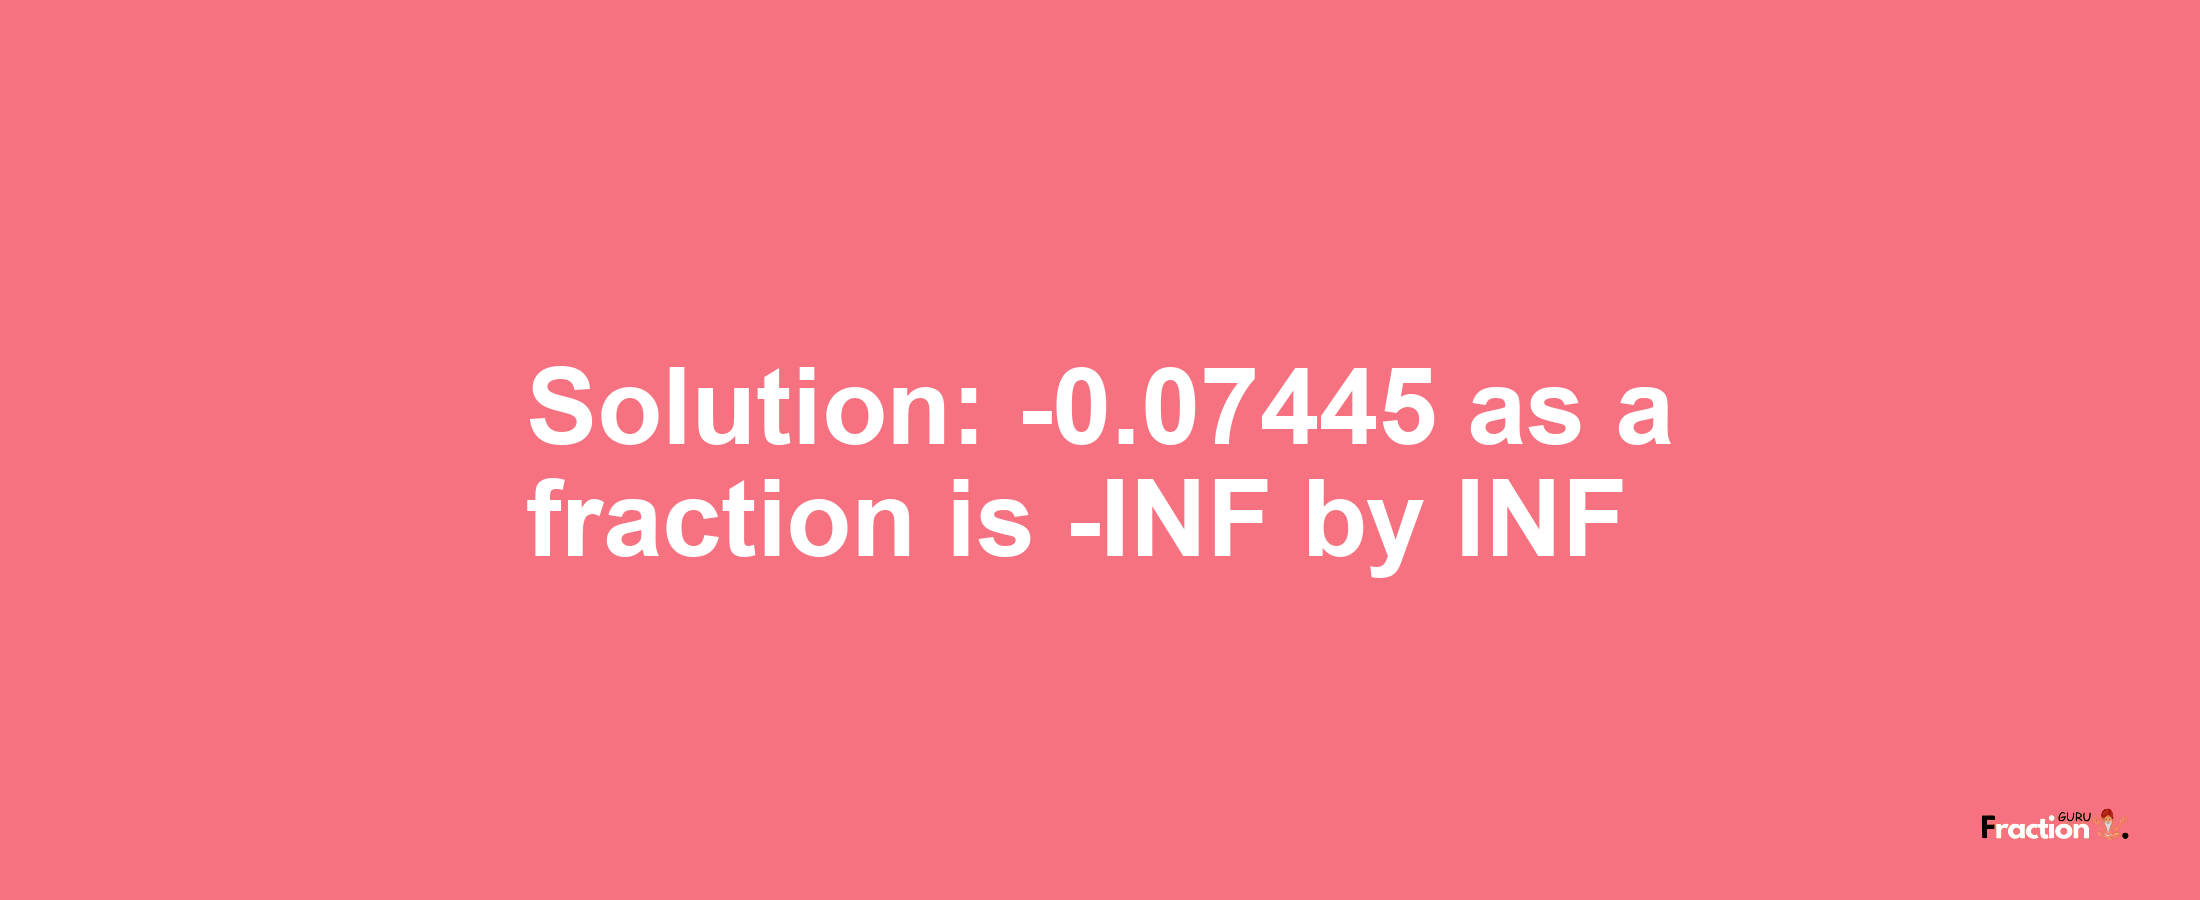 Solution:-0.07445 as a fraction is -INF/INF